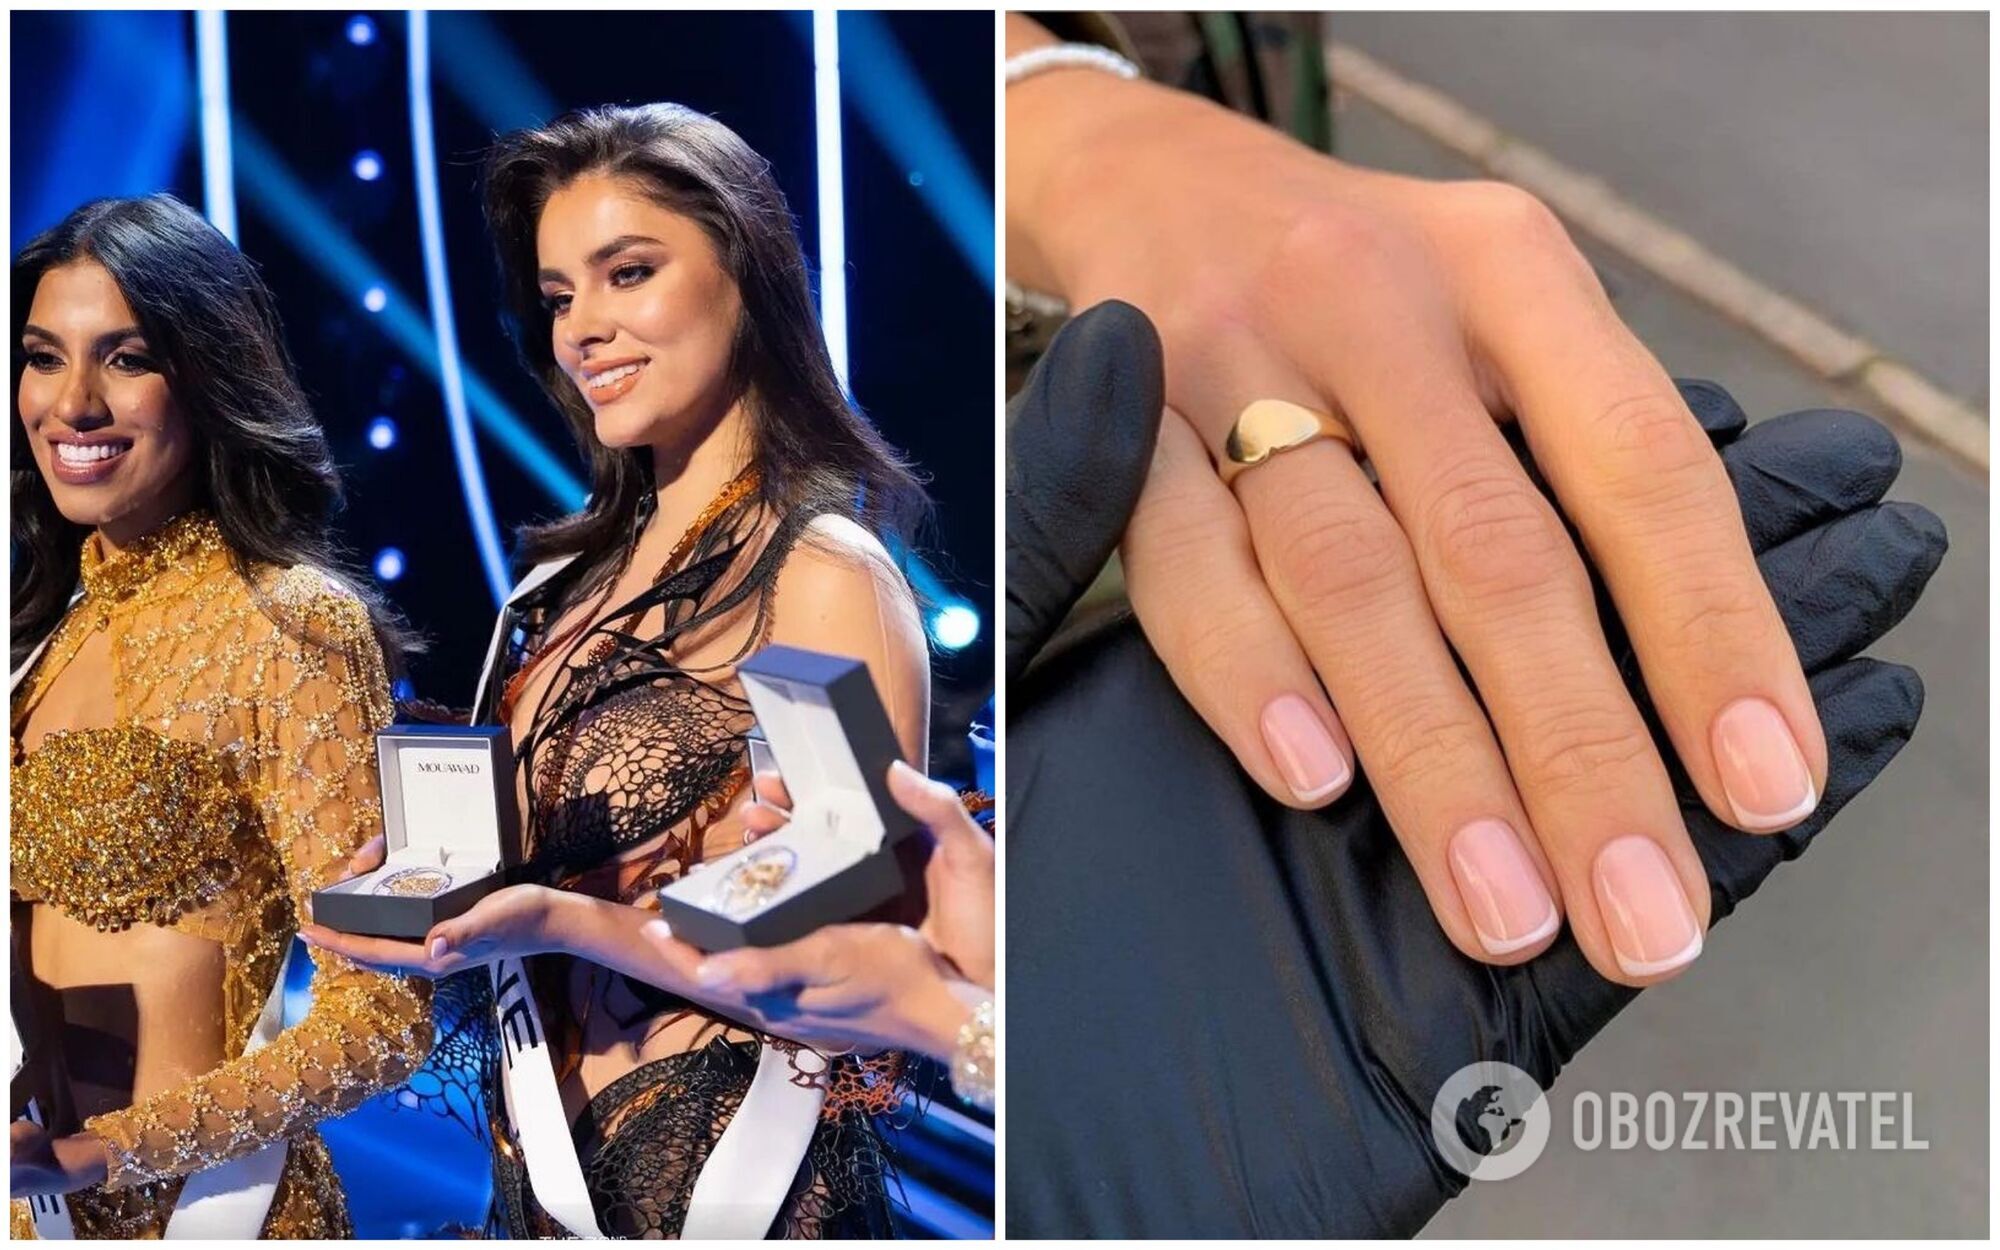 It will never go out of fashion: what manicure the participant of Miss Universe 2023 from Ukraine Anhelina Usanova wore at the contest